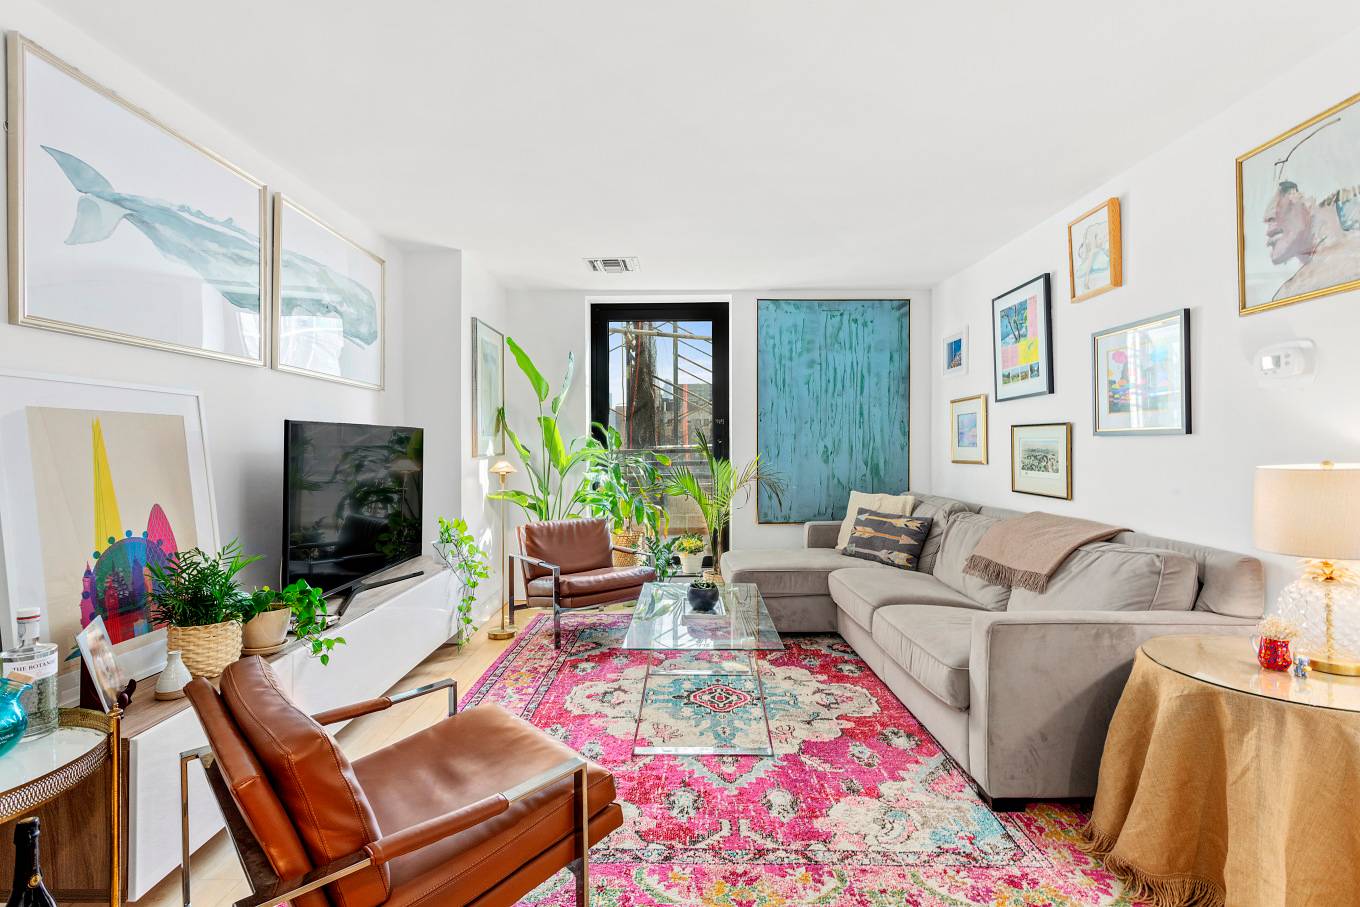 Fabulous Historic Pre war Condo Renovated one bedroom with a step out terrace.